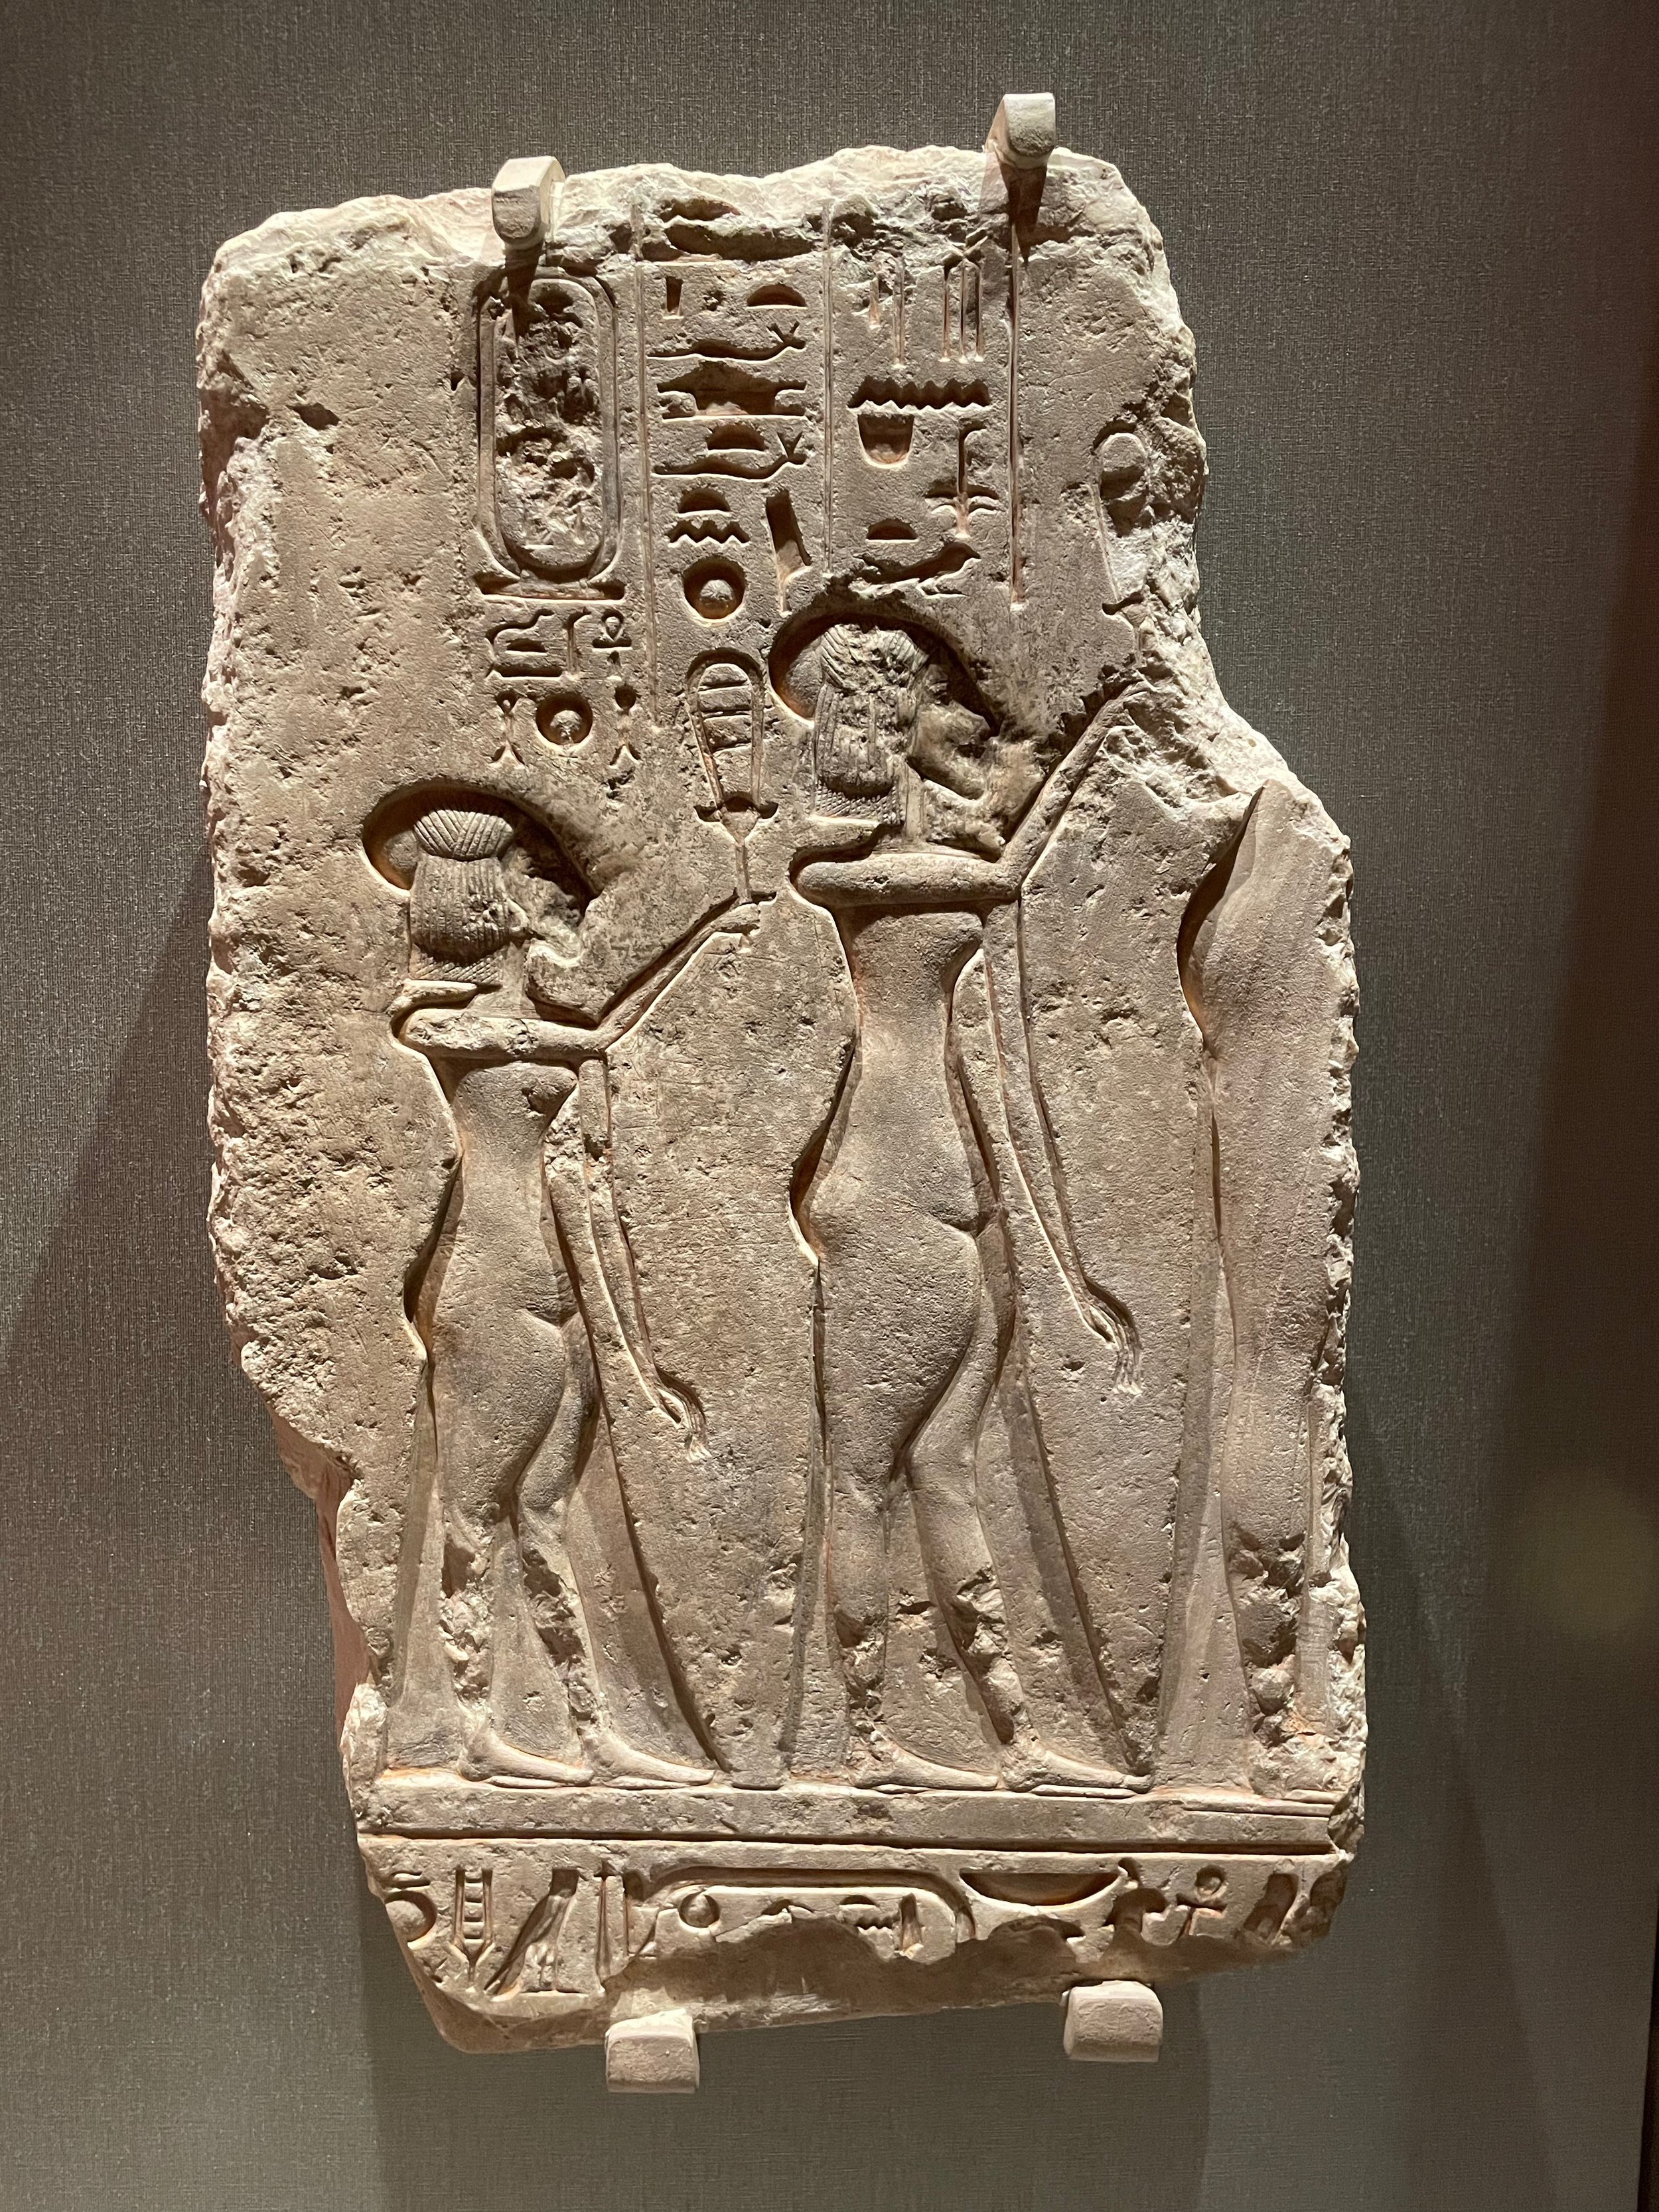  A tablet fragment showing women in worship (I thought it was beautiful) 